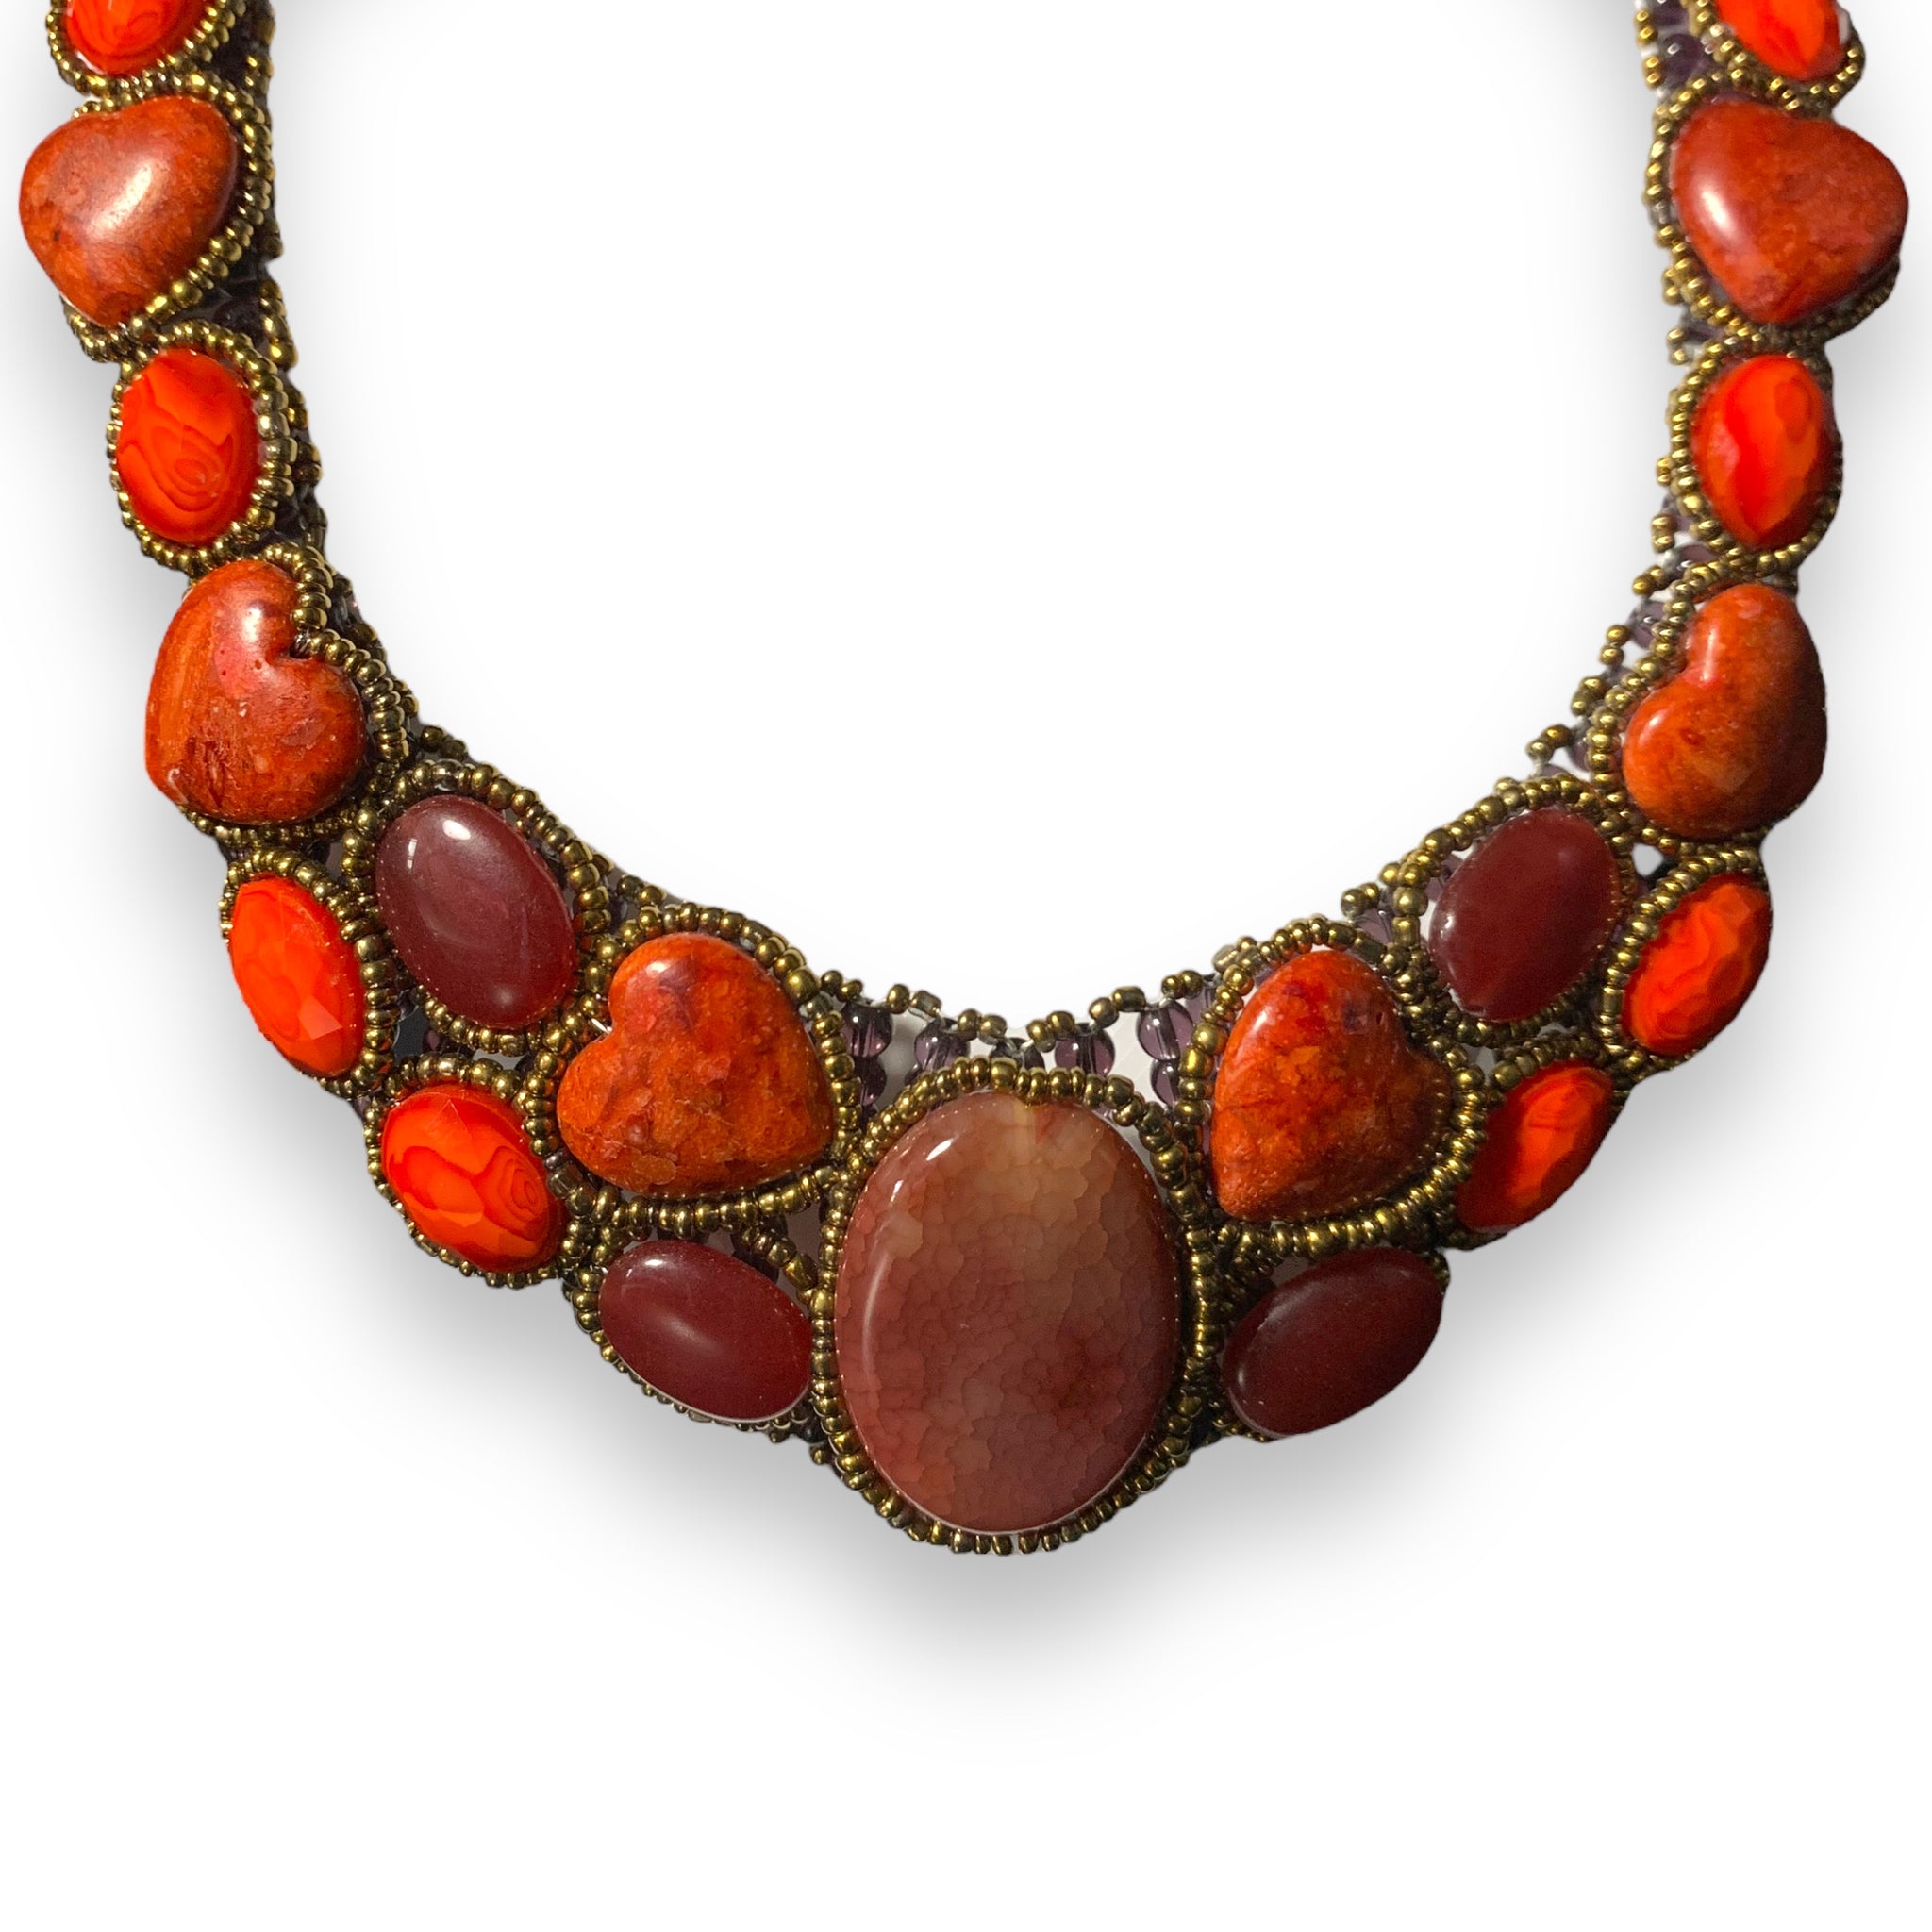 Handmade Choker 20" Unique Coral and Agate Statement Bib Necklace